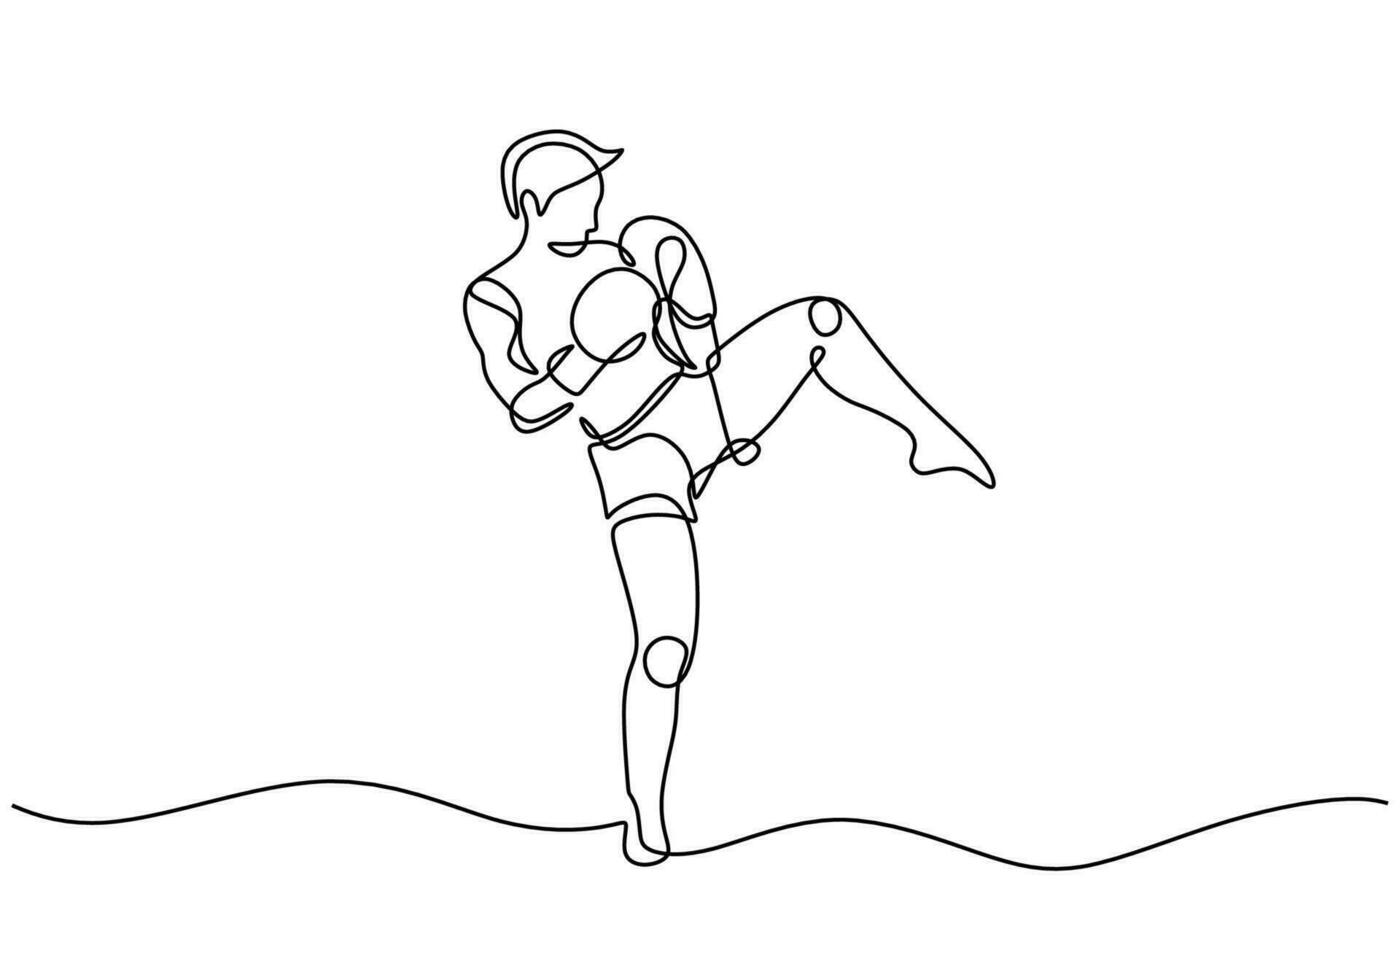 Kickboxing continuous line drawing. Vector illustration